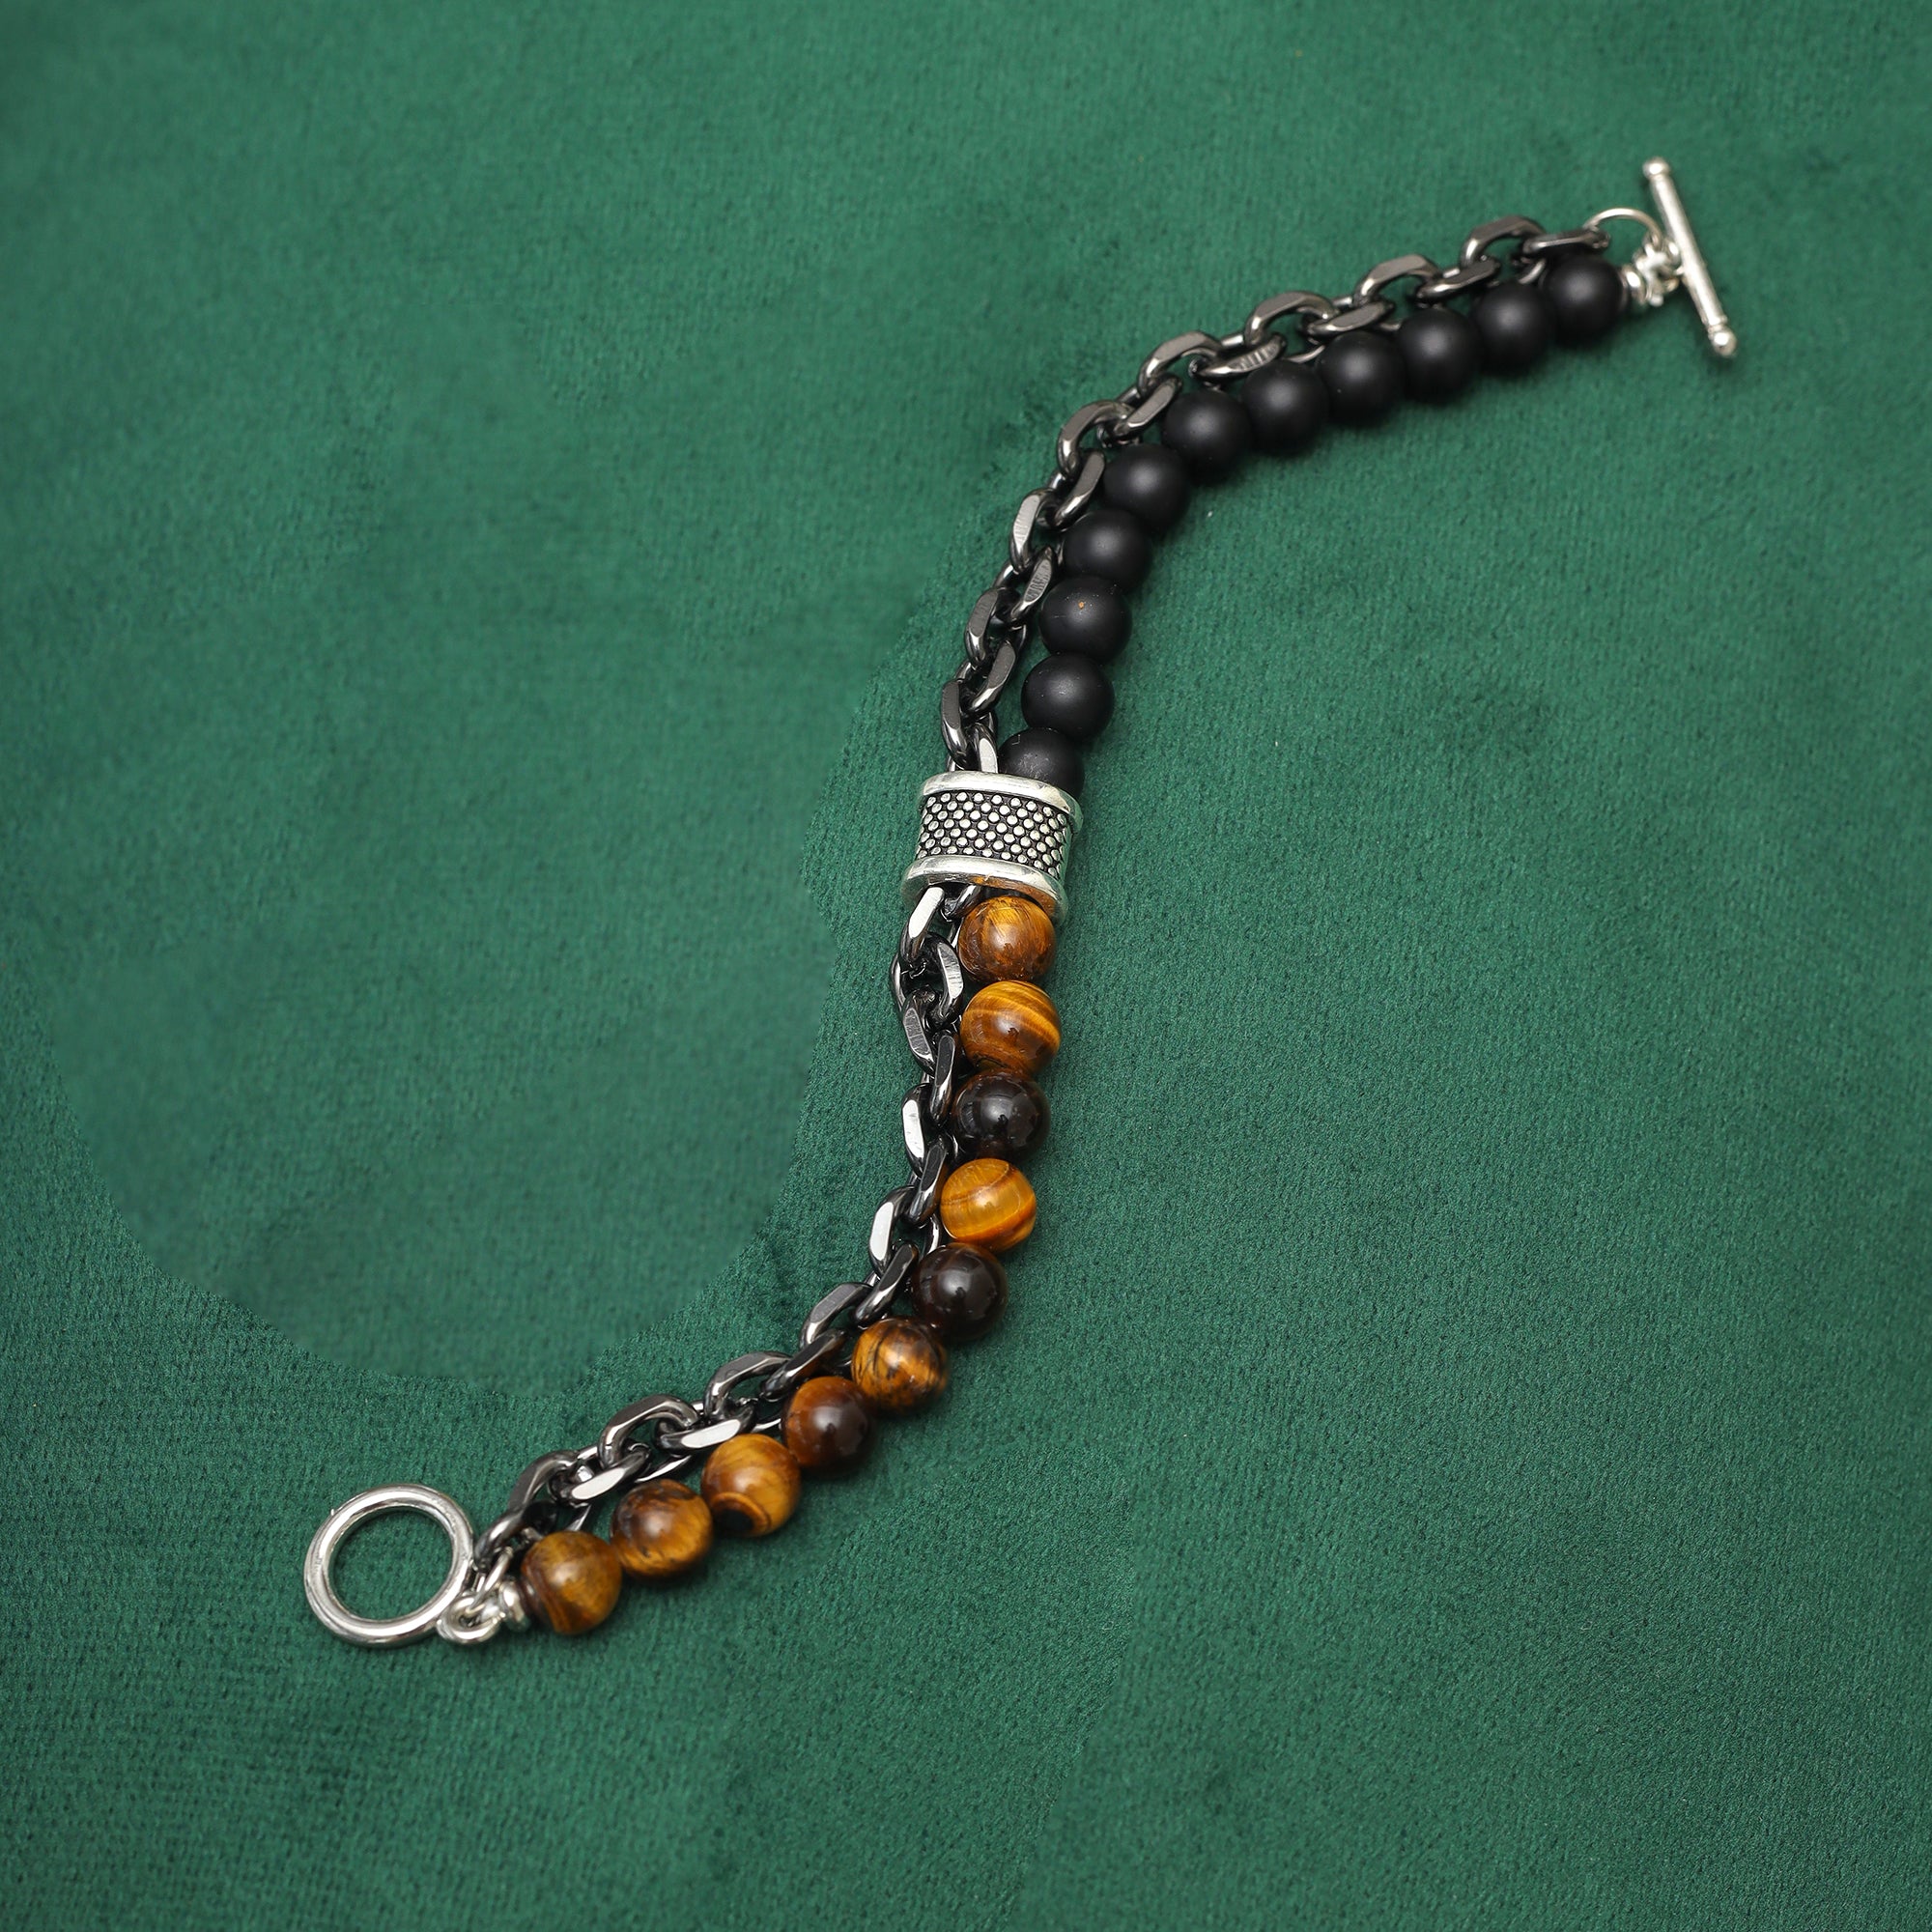 Brown Beads With Chain Bracelet